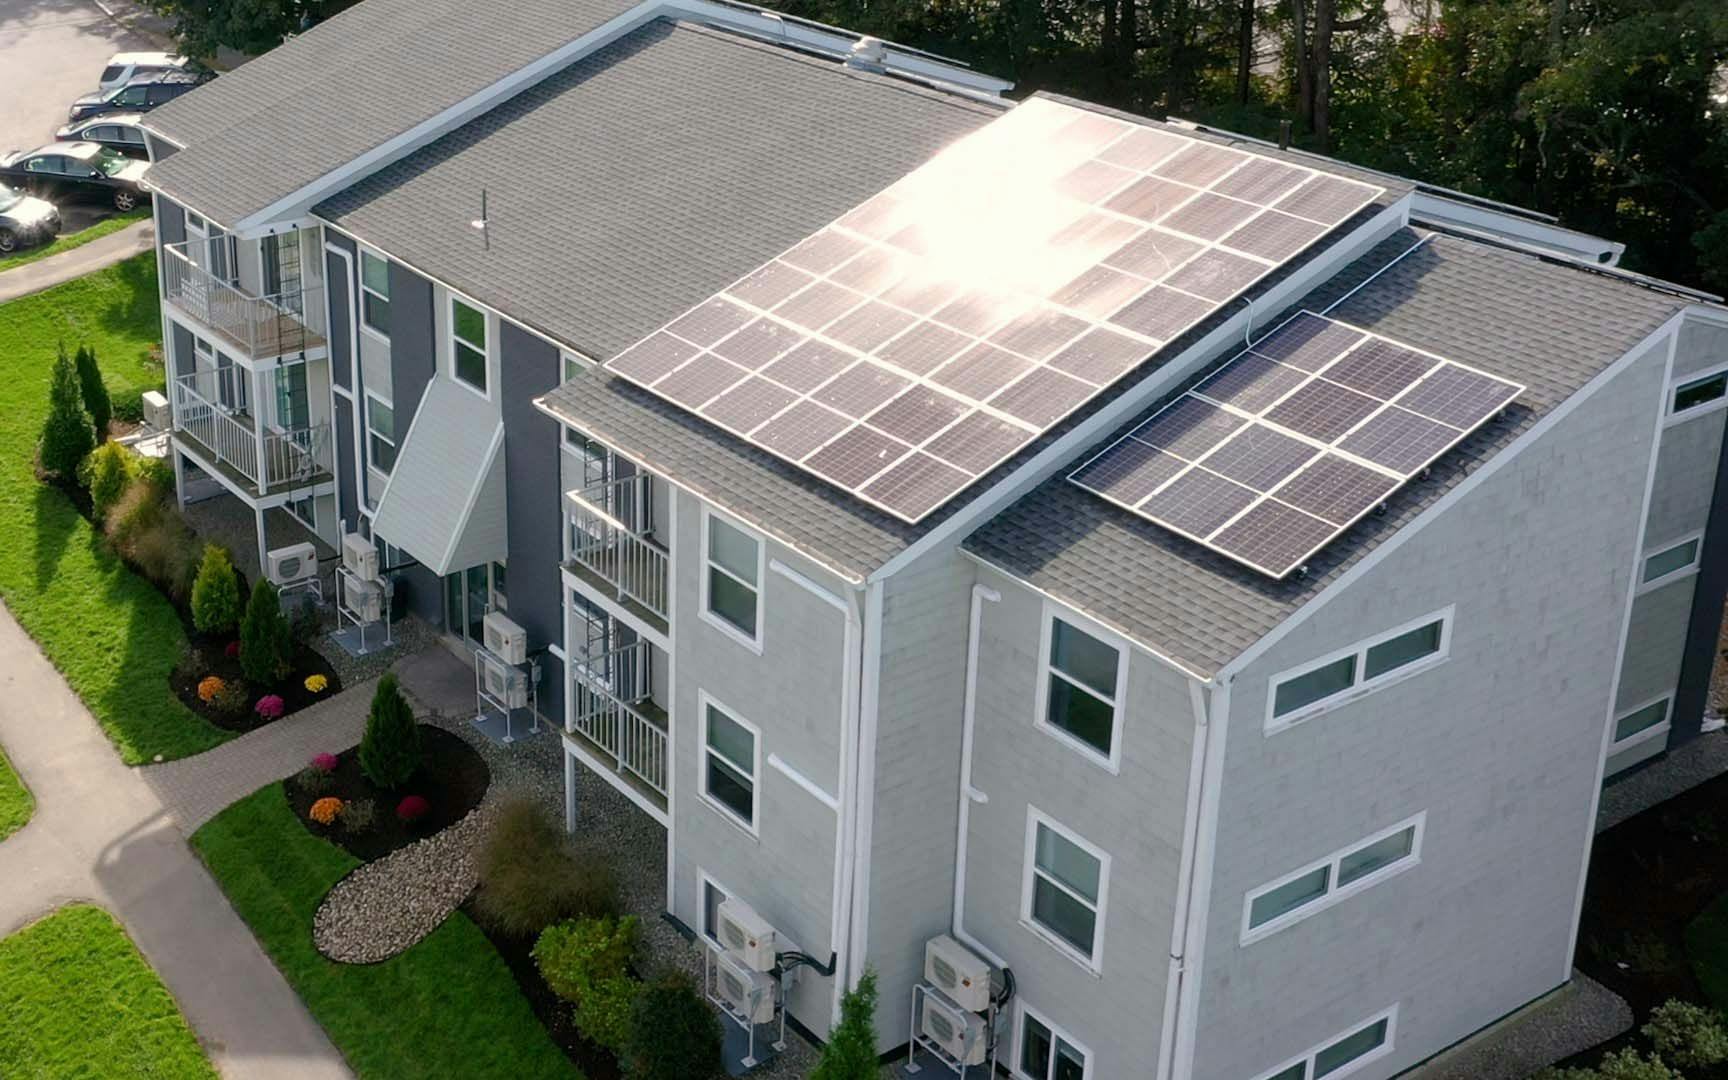 Solar panels on an apartment complex roof.